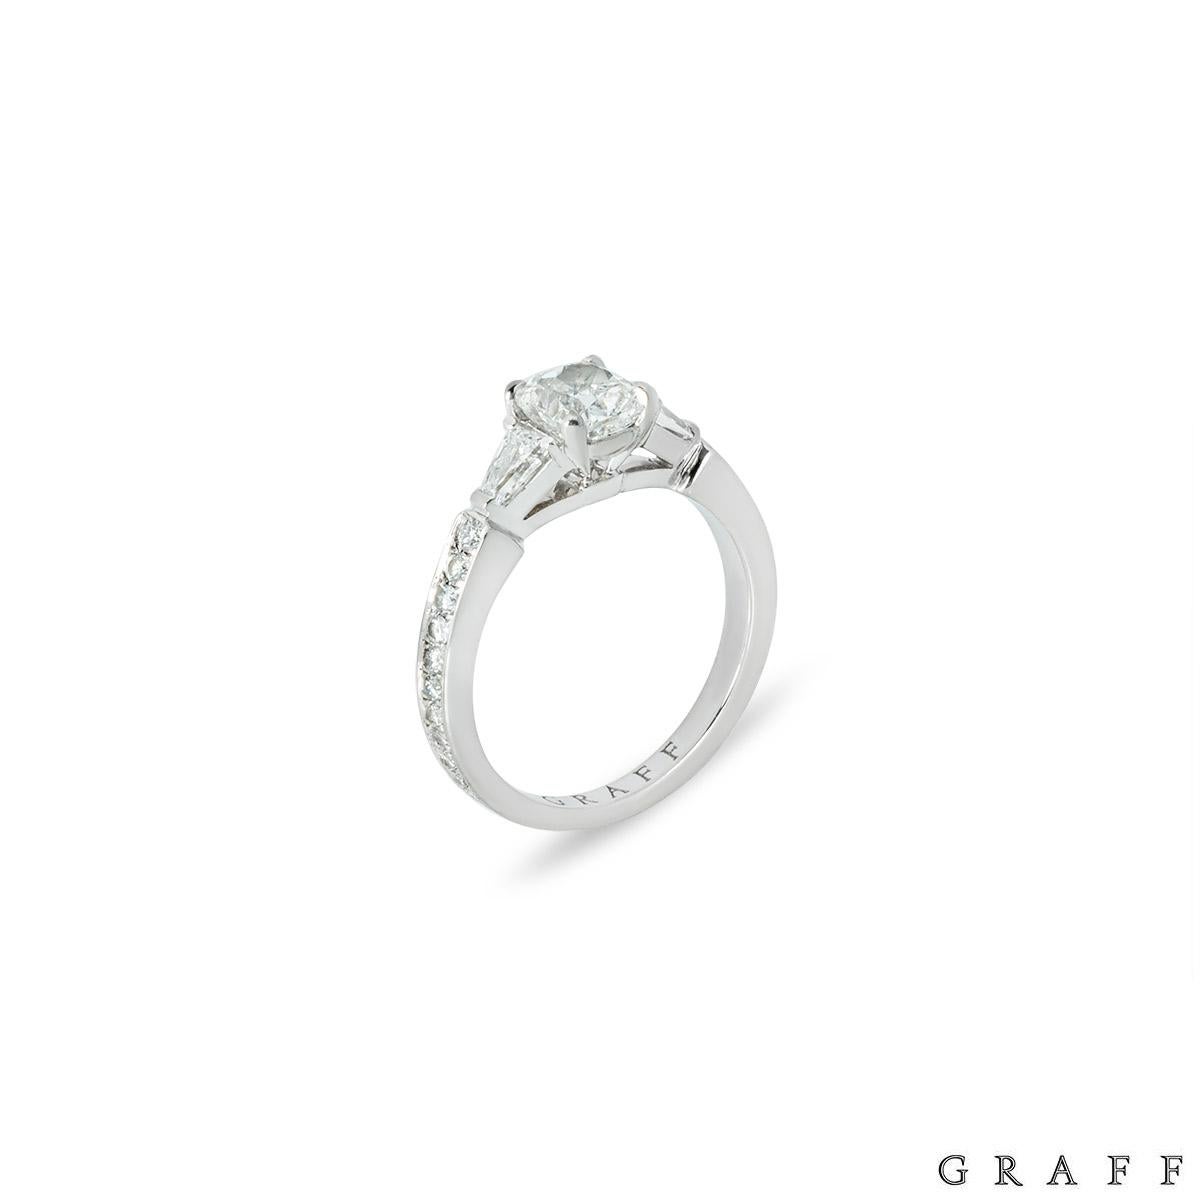 A gorgeous platinum diamond engagement ring by Graff from the Promise collection. The centre of the ring is adorned with a cushion cut diamond weighing 0.90ct, G colour and VS1 clarity. The centre stone is flanked by two tapered baguette cut